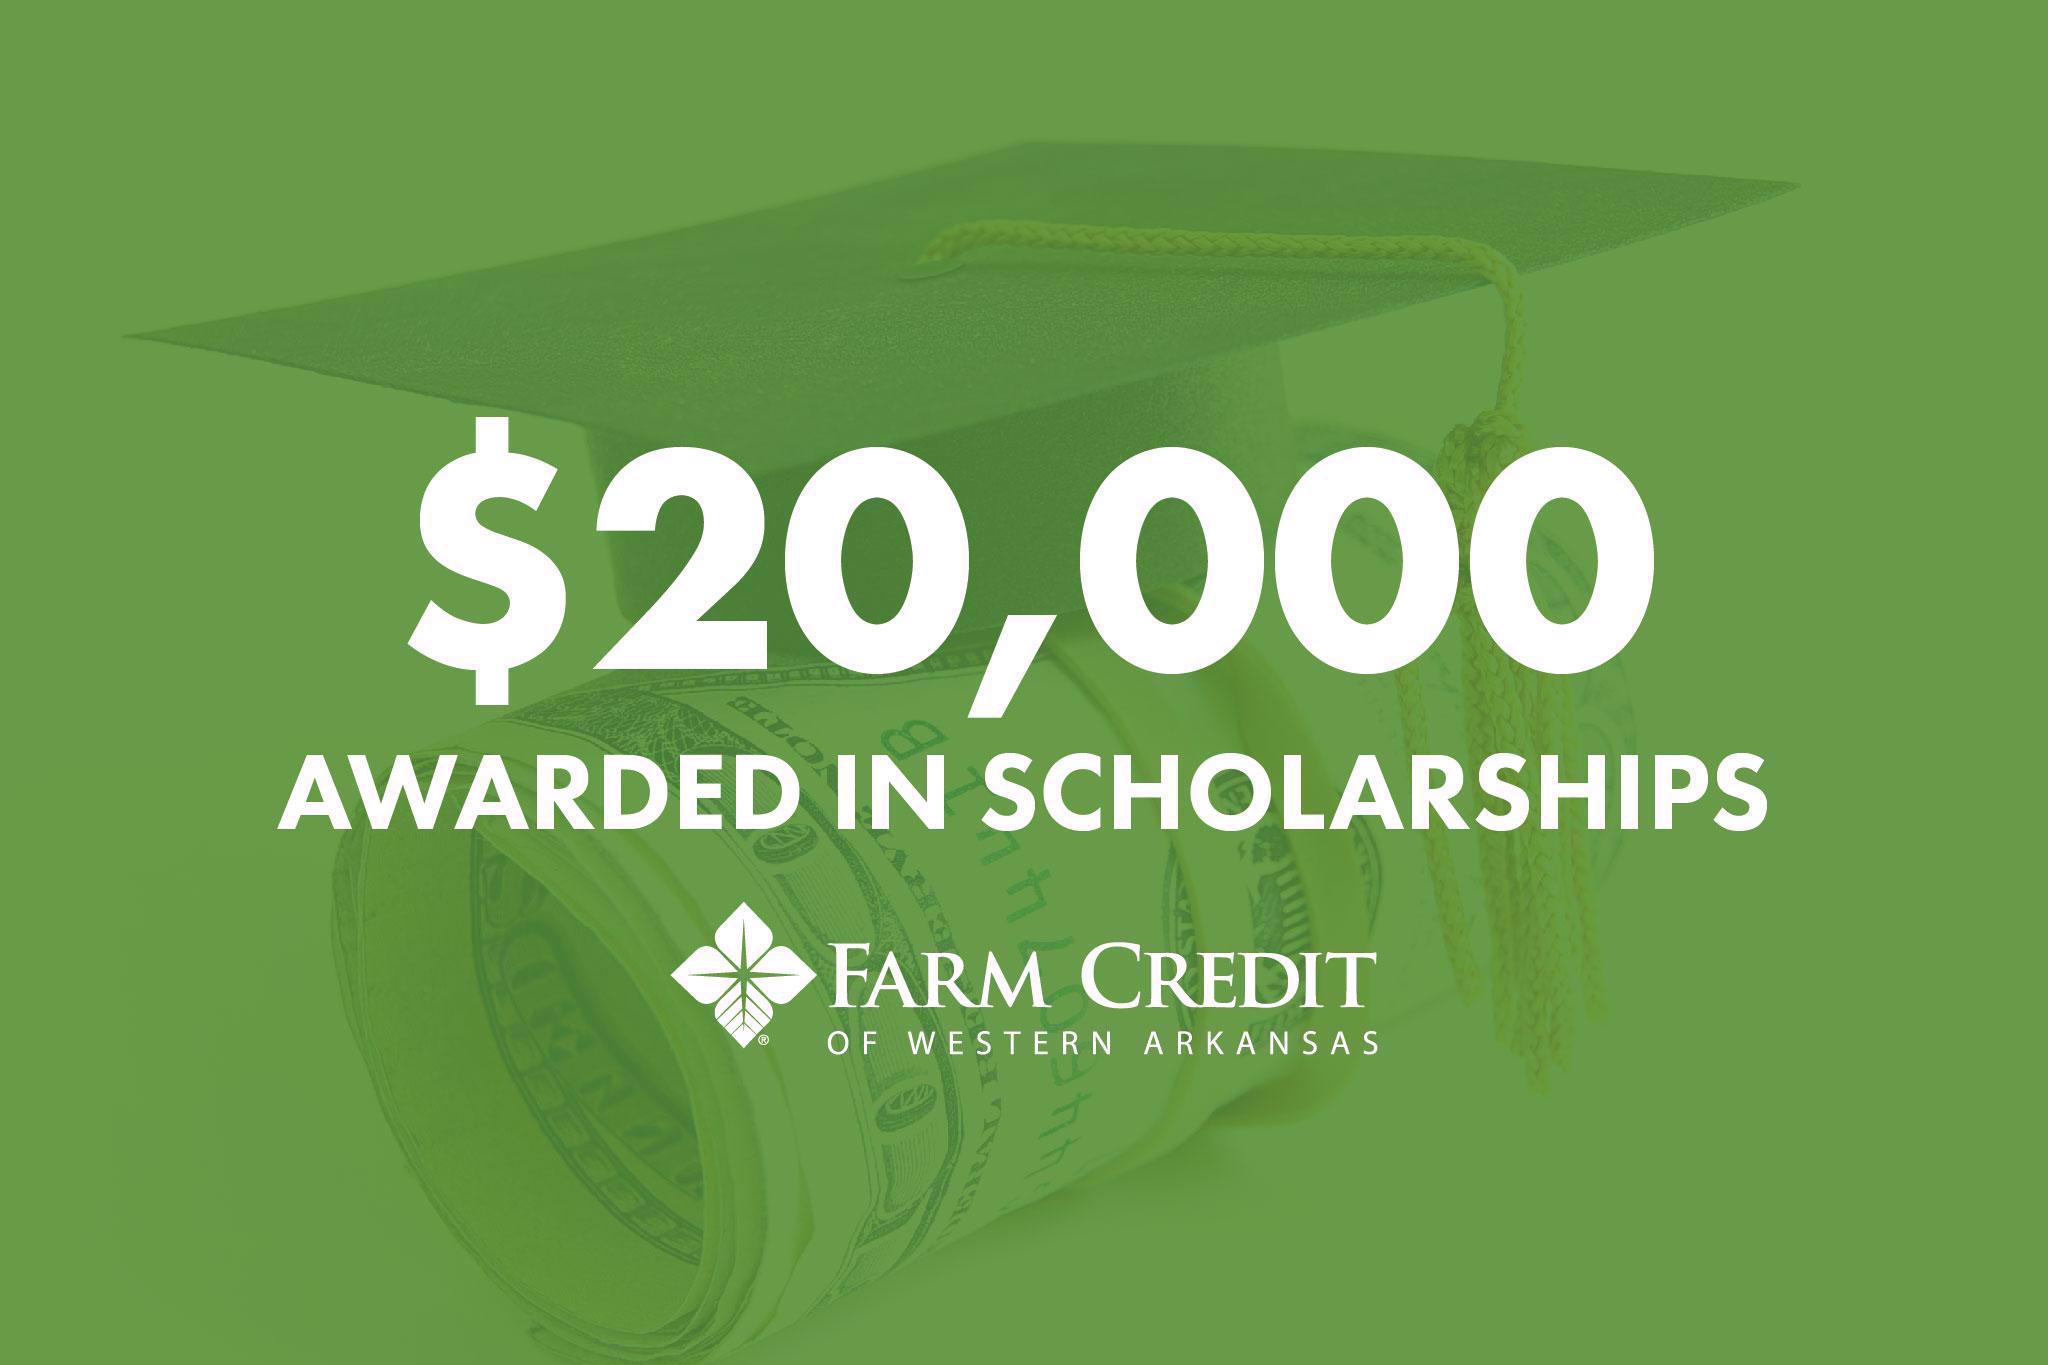 Text reads "$20,000 awarded in scholarships" with Farm Credit logo at bottom